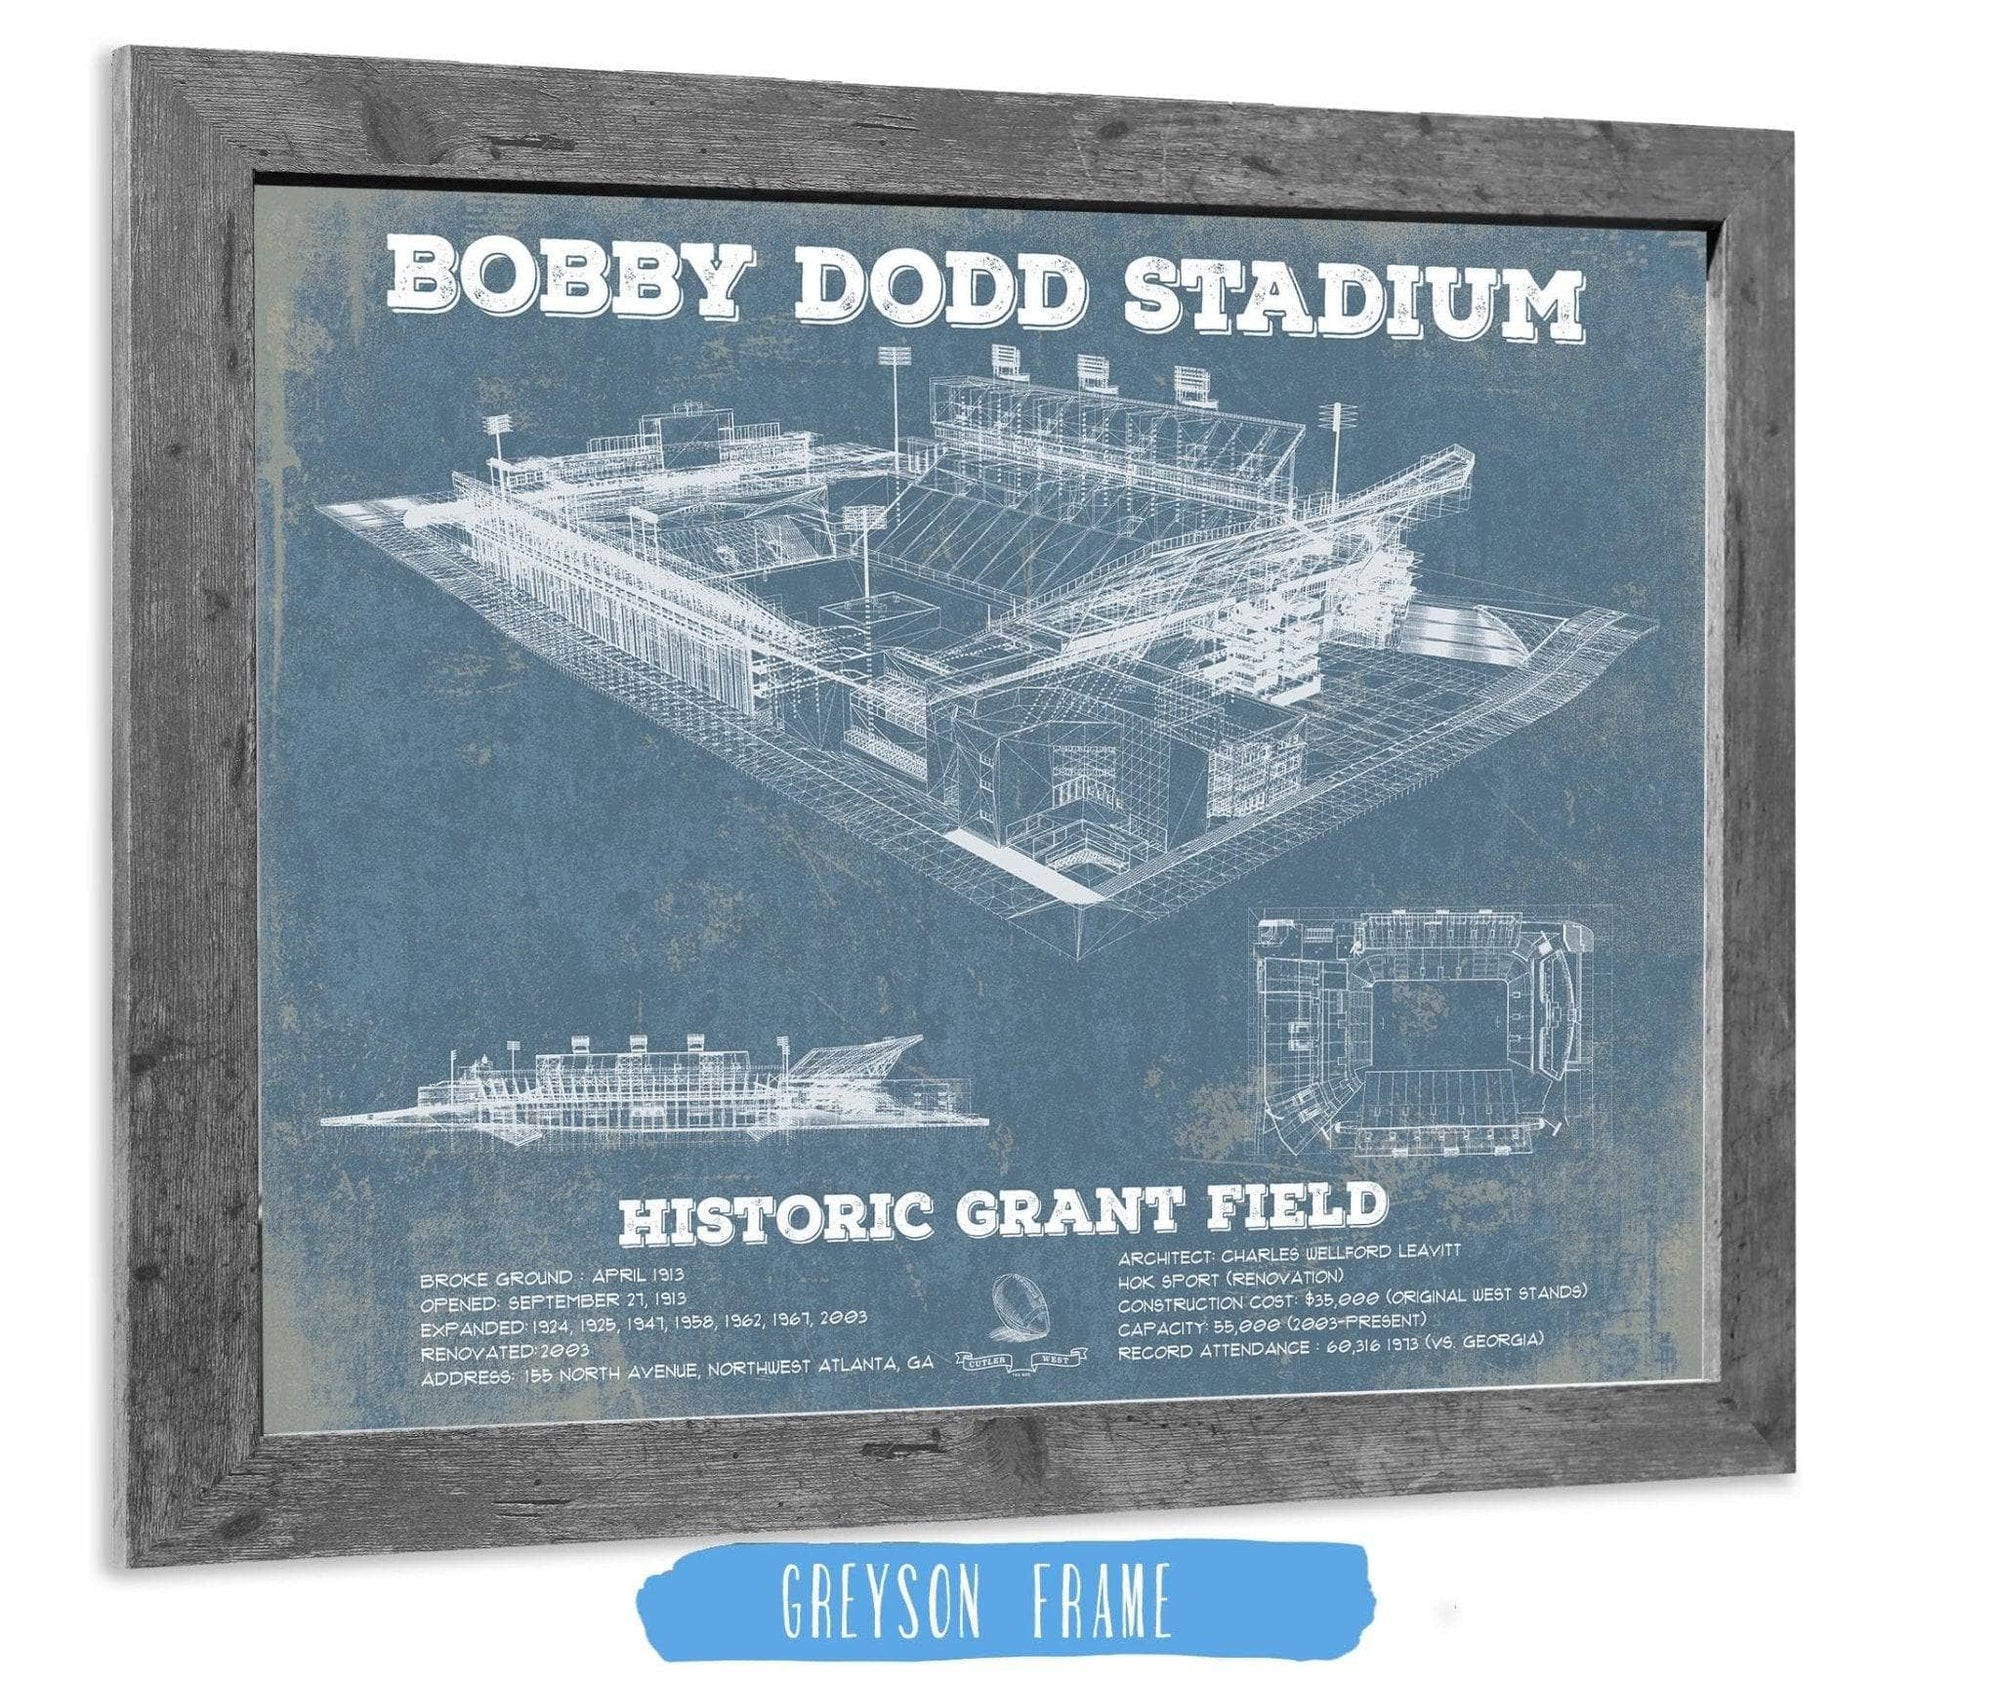 Cutler West College Football Collection 14" x 11" / Greyson Frame Georgia Tech Yellow Jackets - Bobby Dodd Stadium at Historic Grant Field 835000125_48744